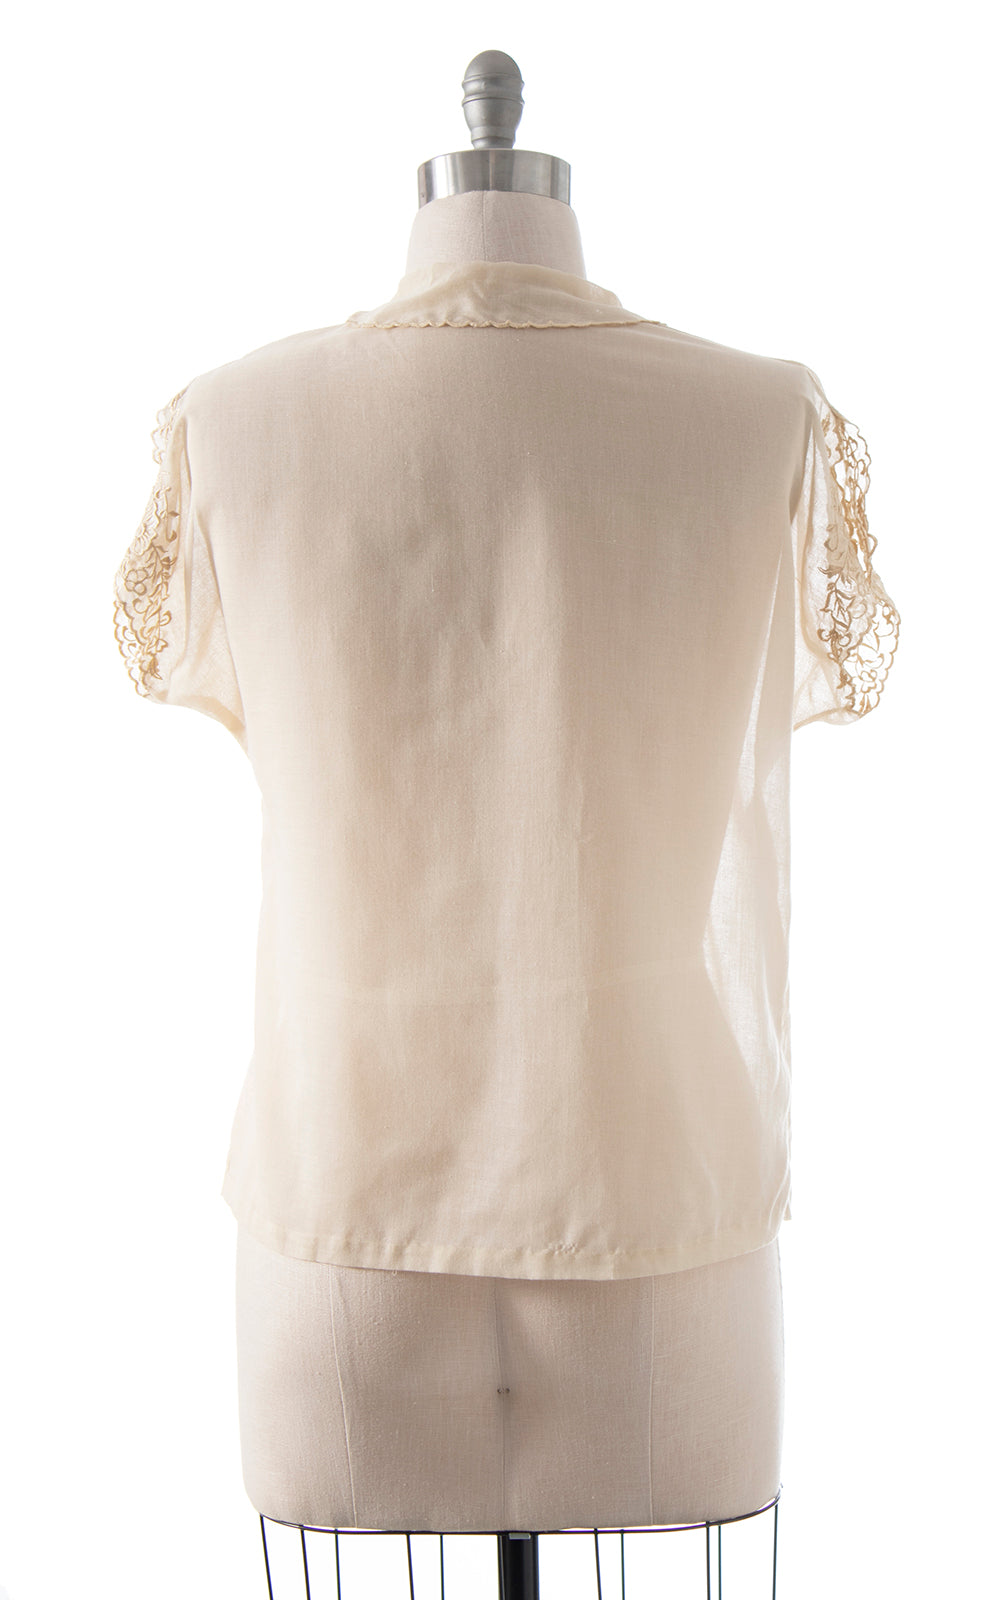 1980s Floral Embroidered Cotton Voile Blouse | large/x-large